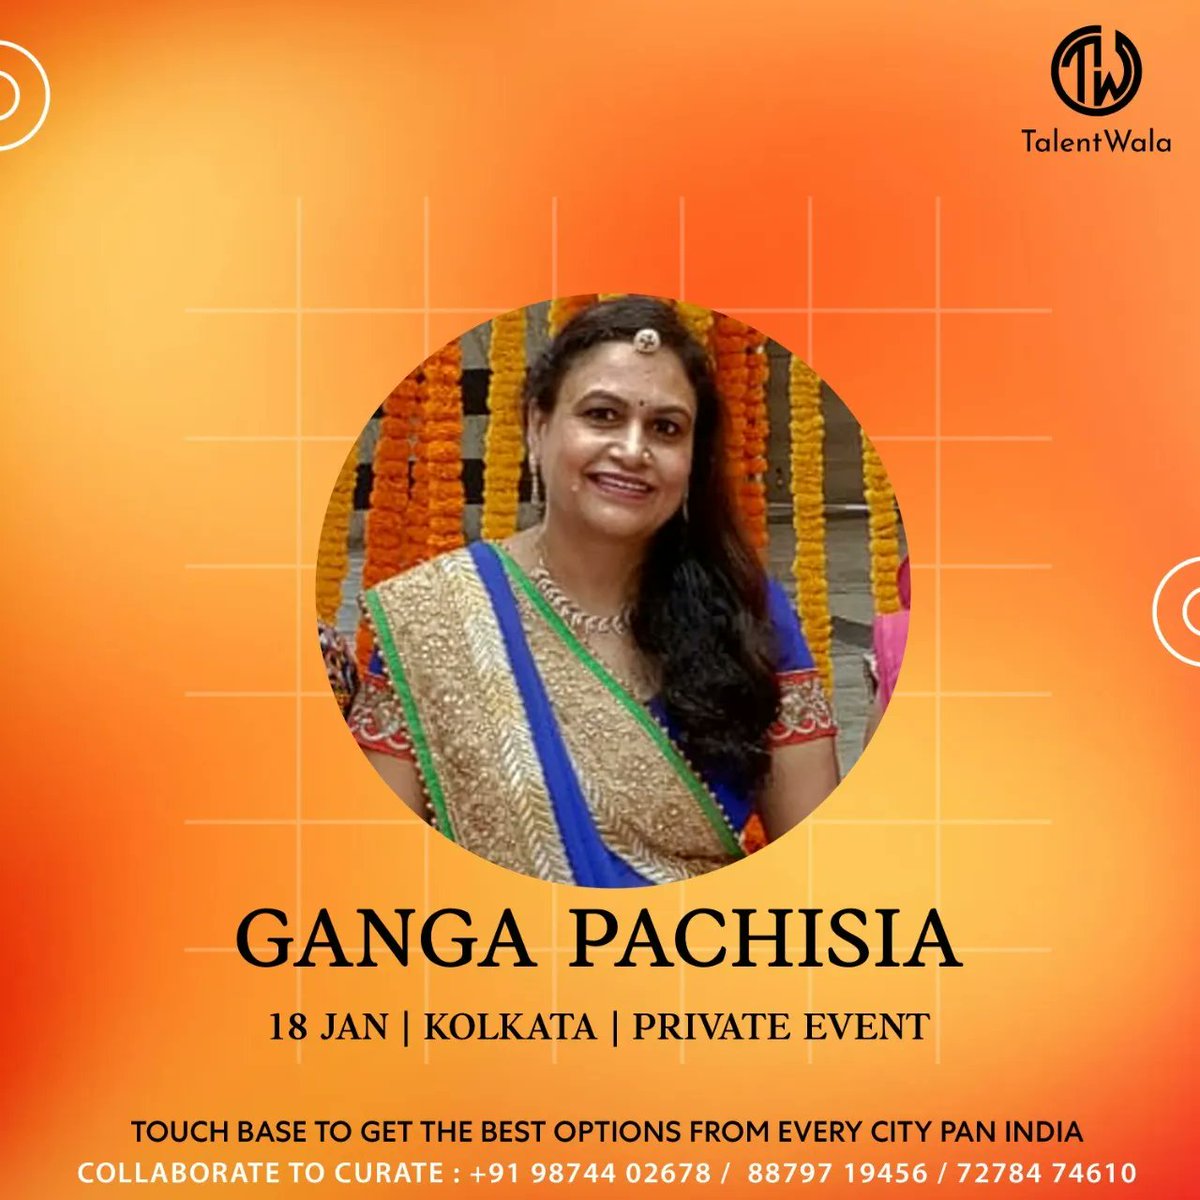 The very talented ceremonial singer Ganga
Pachisia will make the Myra ceremony a perfect and
memorable day with an attractive musical atmosphere
today at a private event in Kolkata.

#talentwala #artistmanager 
#kolkataevent #artistsinger #artistsingersinger
#gangapachisia